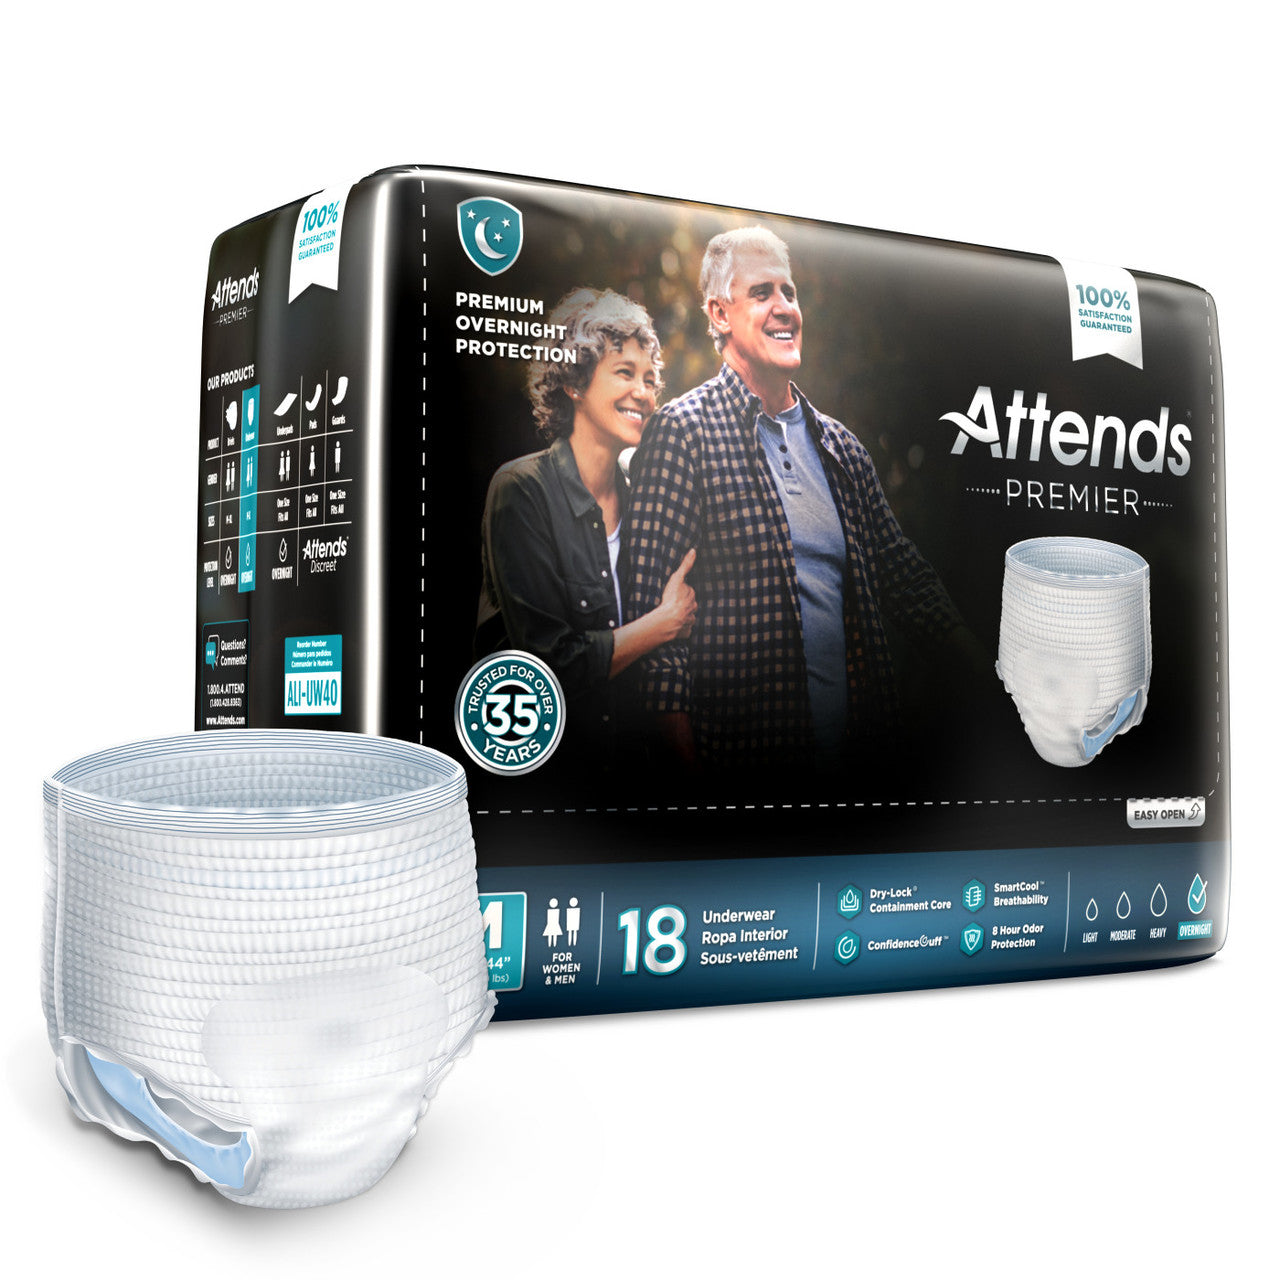 Attends Incontinence Care Breathable Briefs for Adults, Overnight